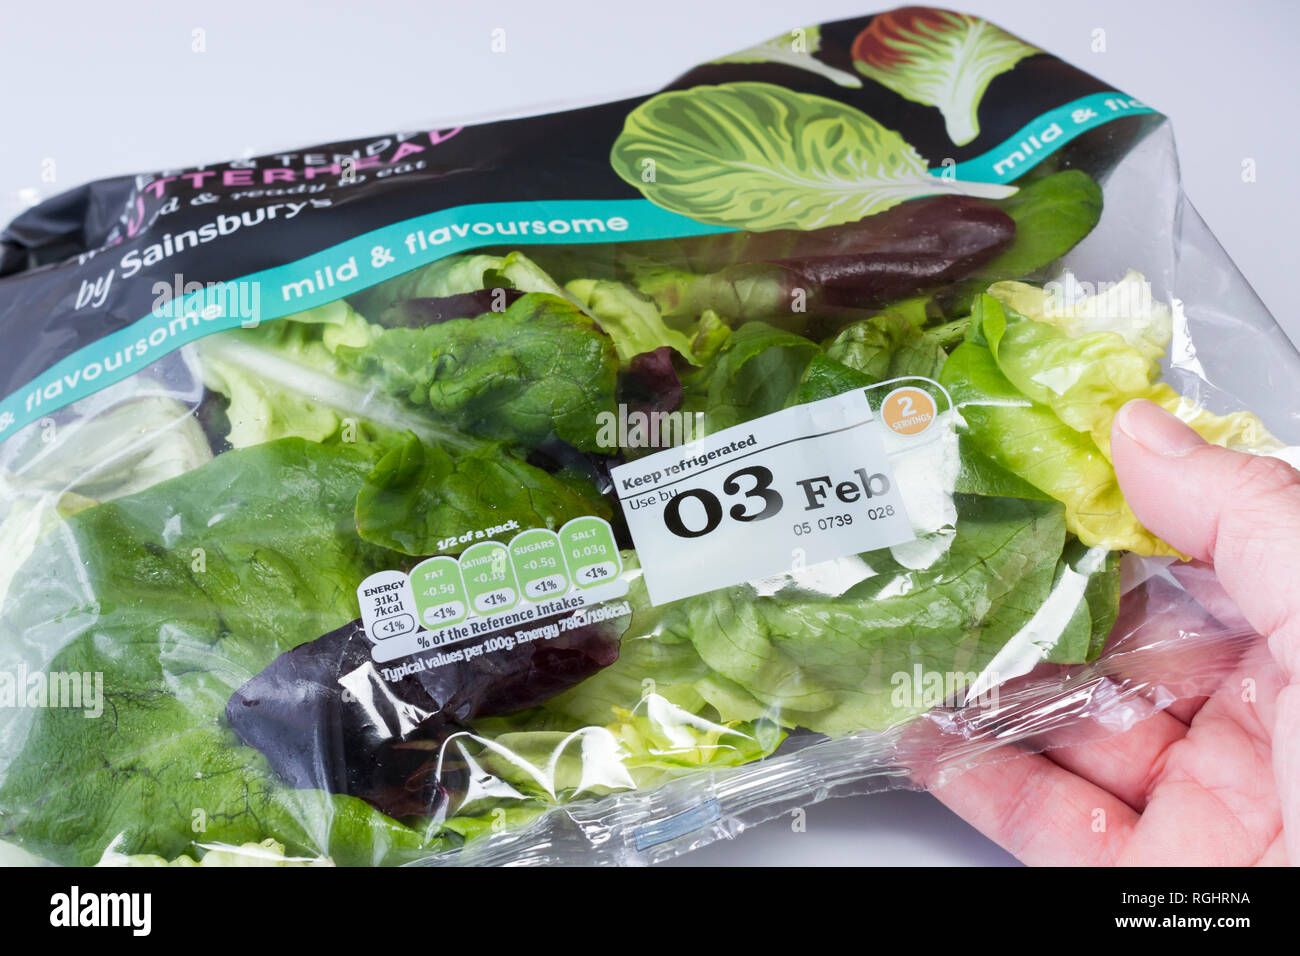 Bagged, packaged salad leaves. UK 2019 Stock Photo